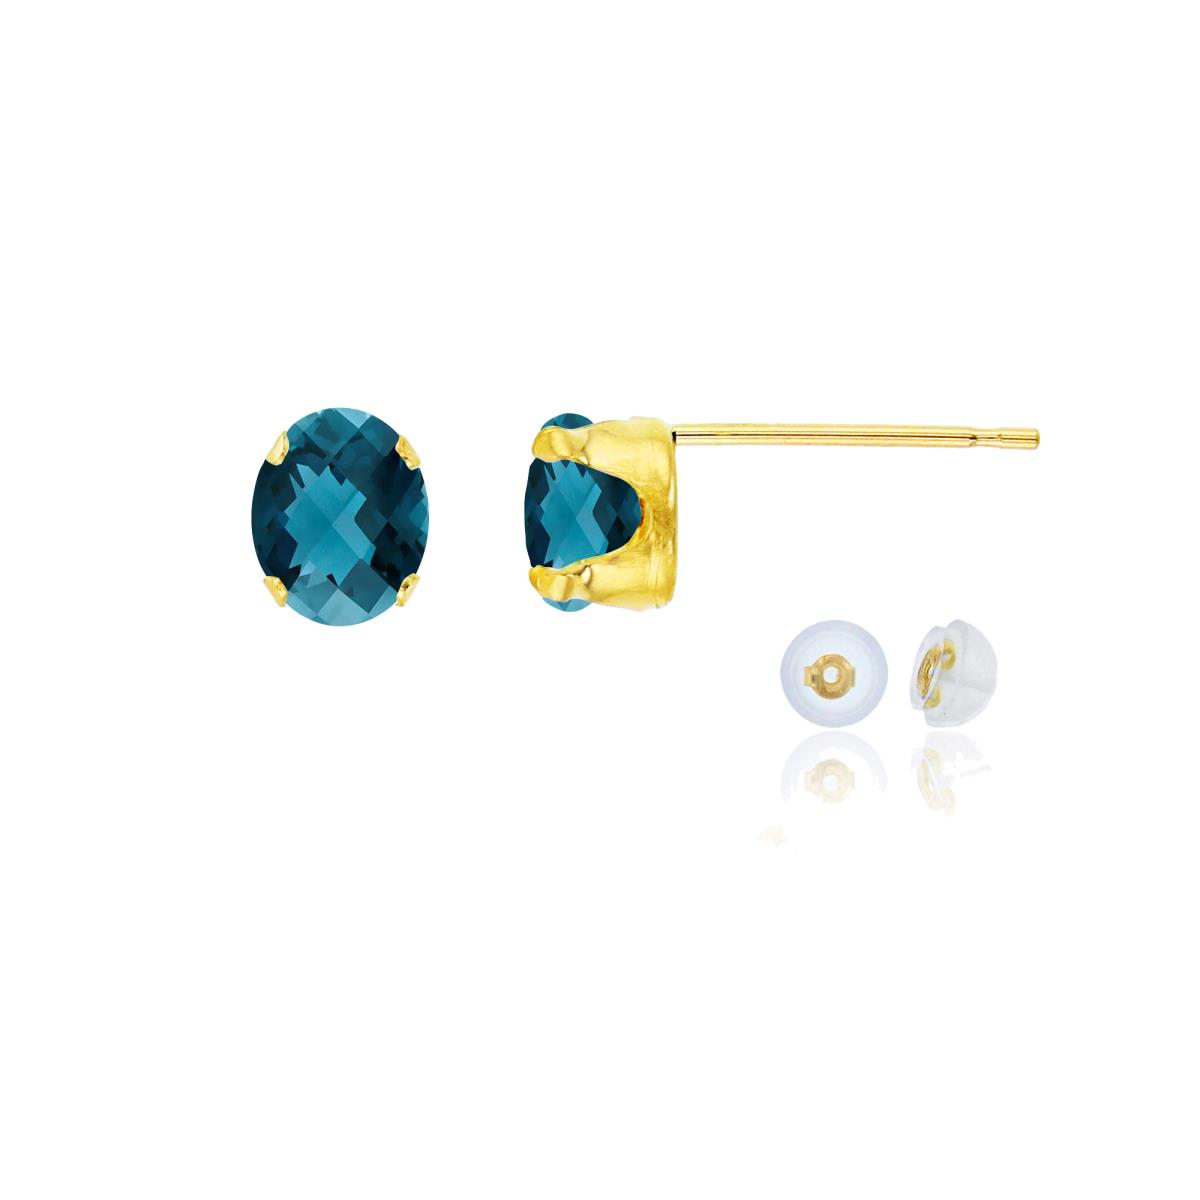 10K Yellow Gold 6x4mm Oval London Blue Topaz Stud Earring with Silicone Back